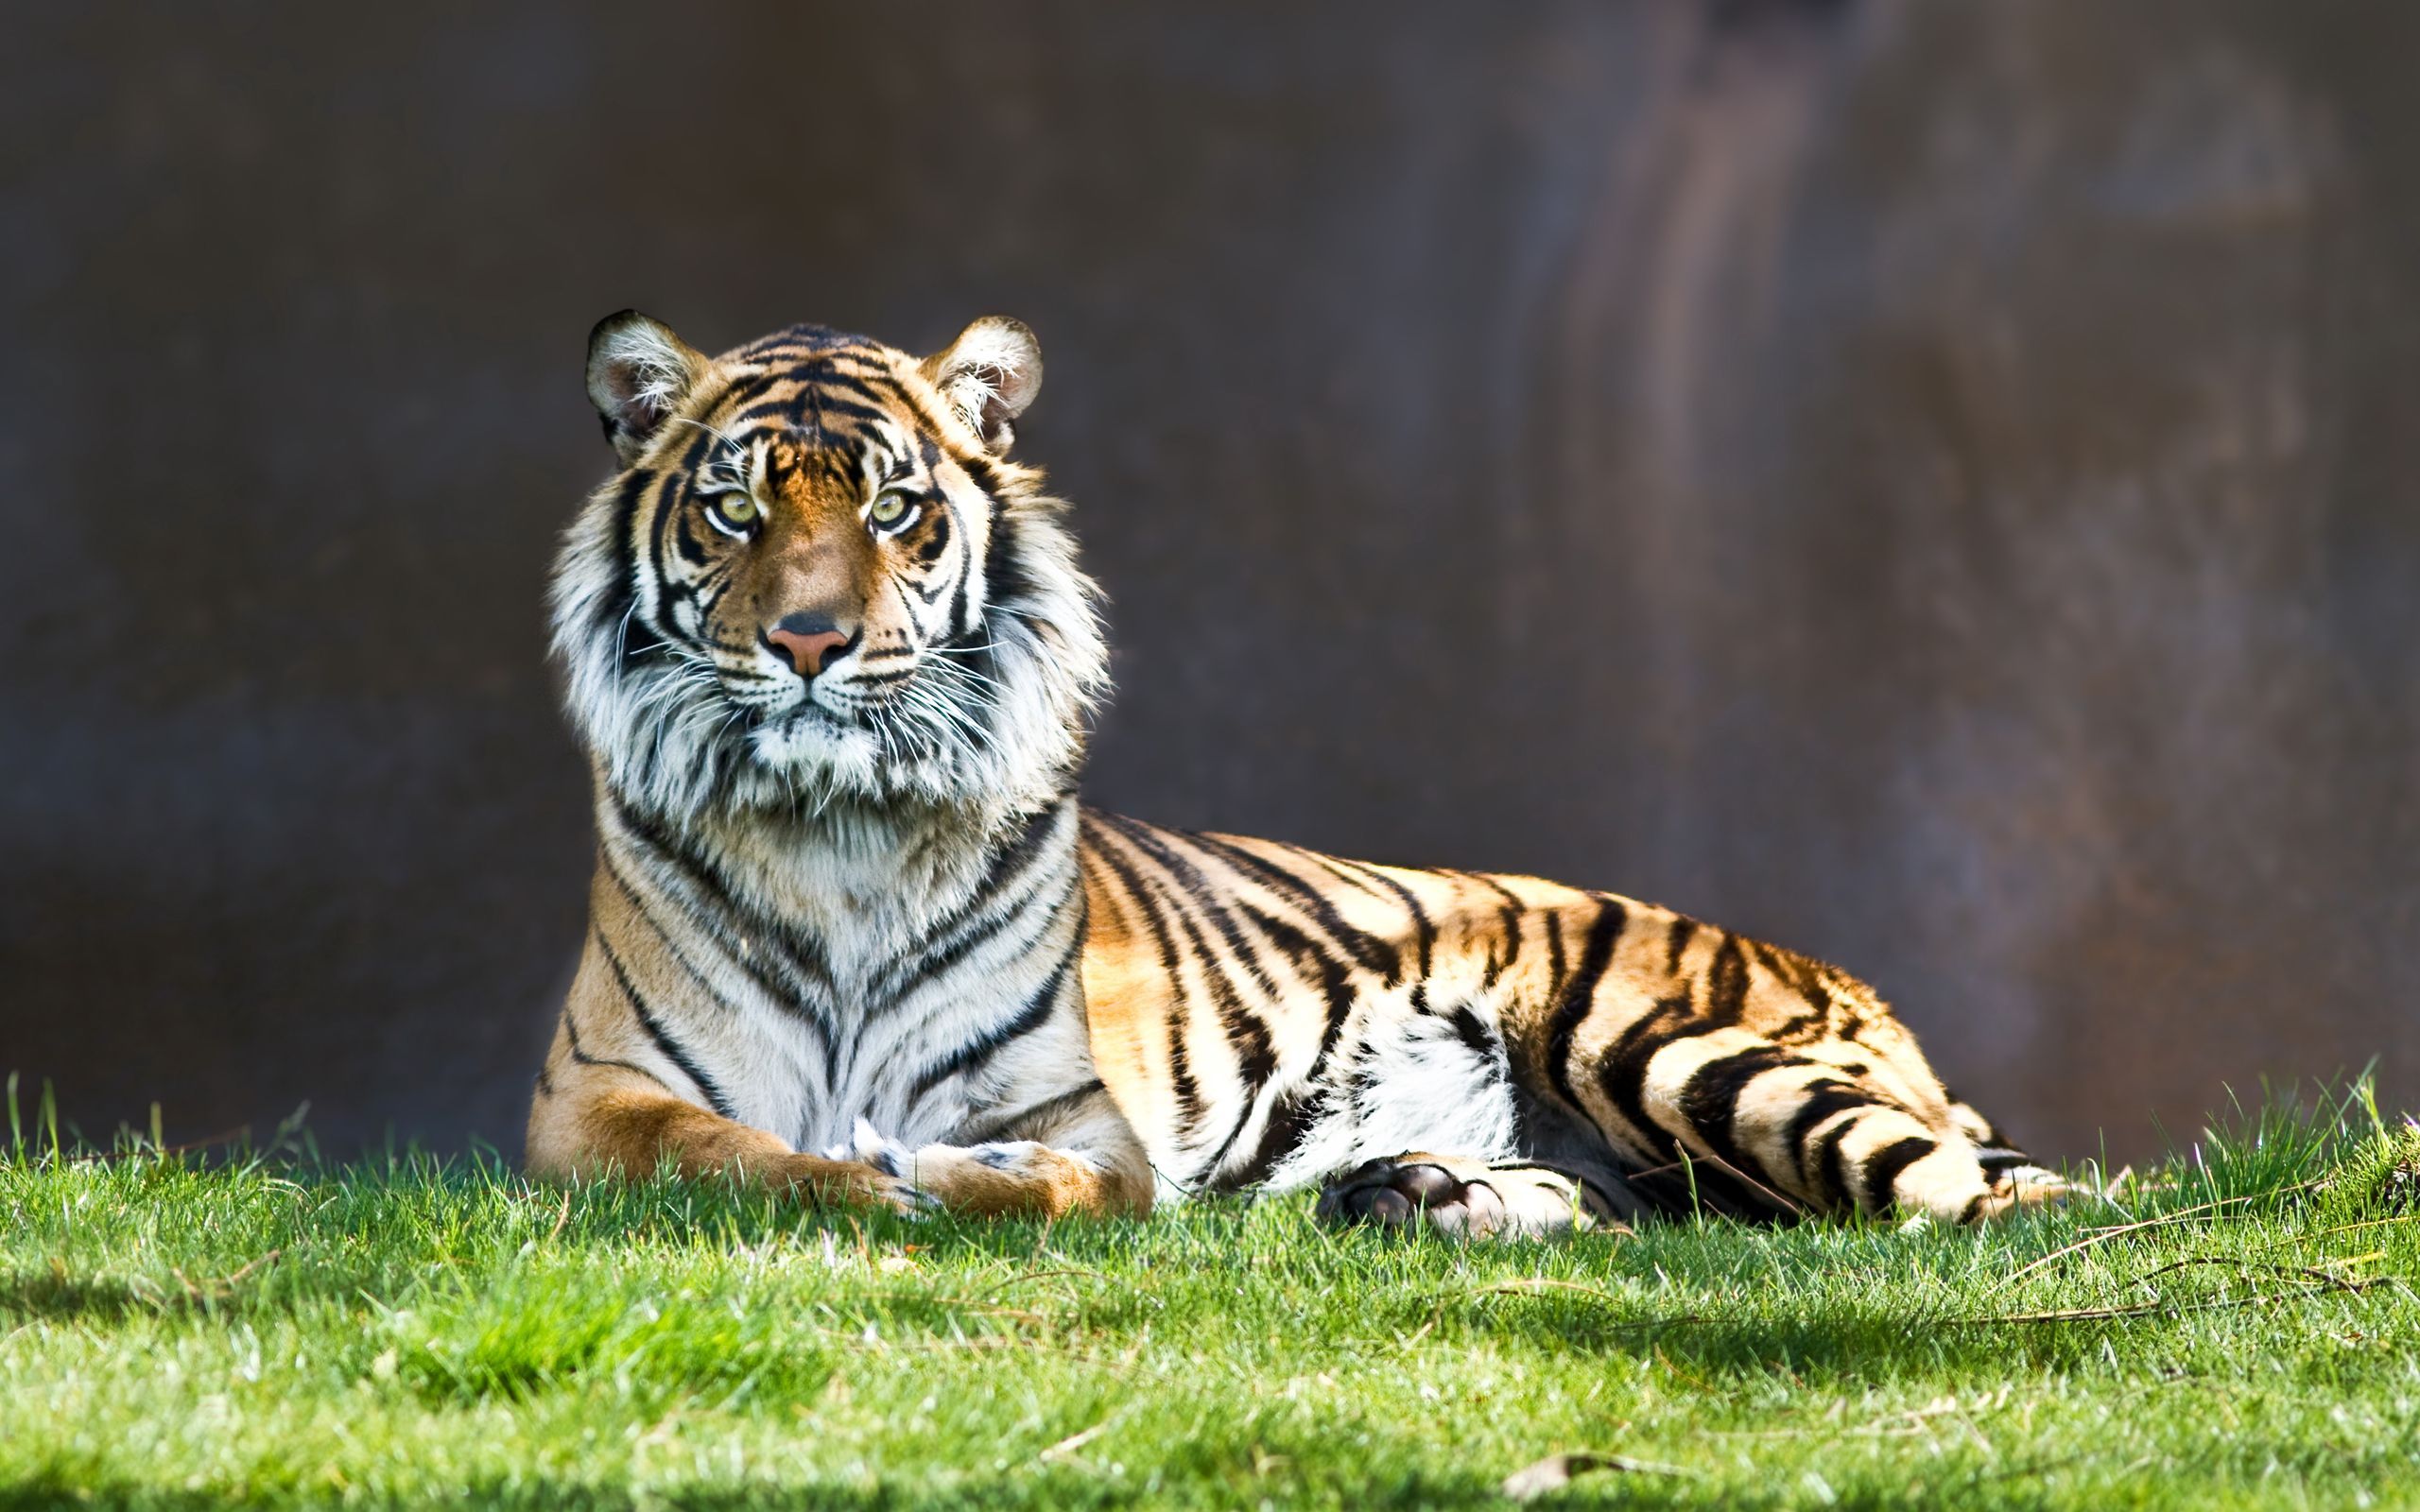 Tiger Wallpapers In HD